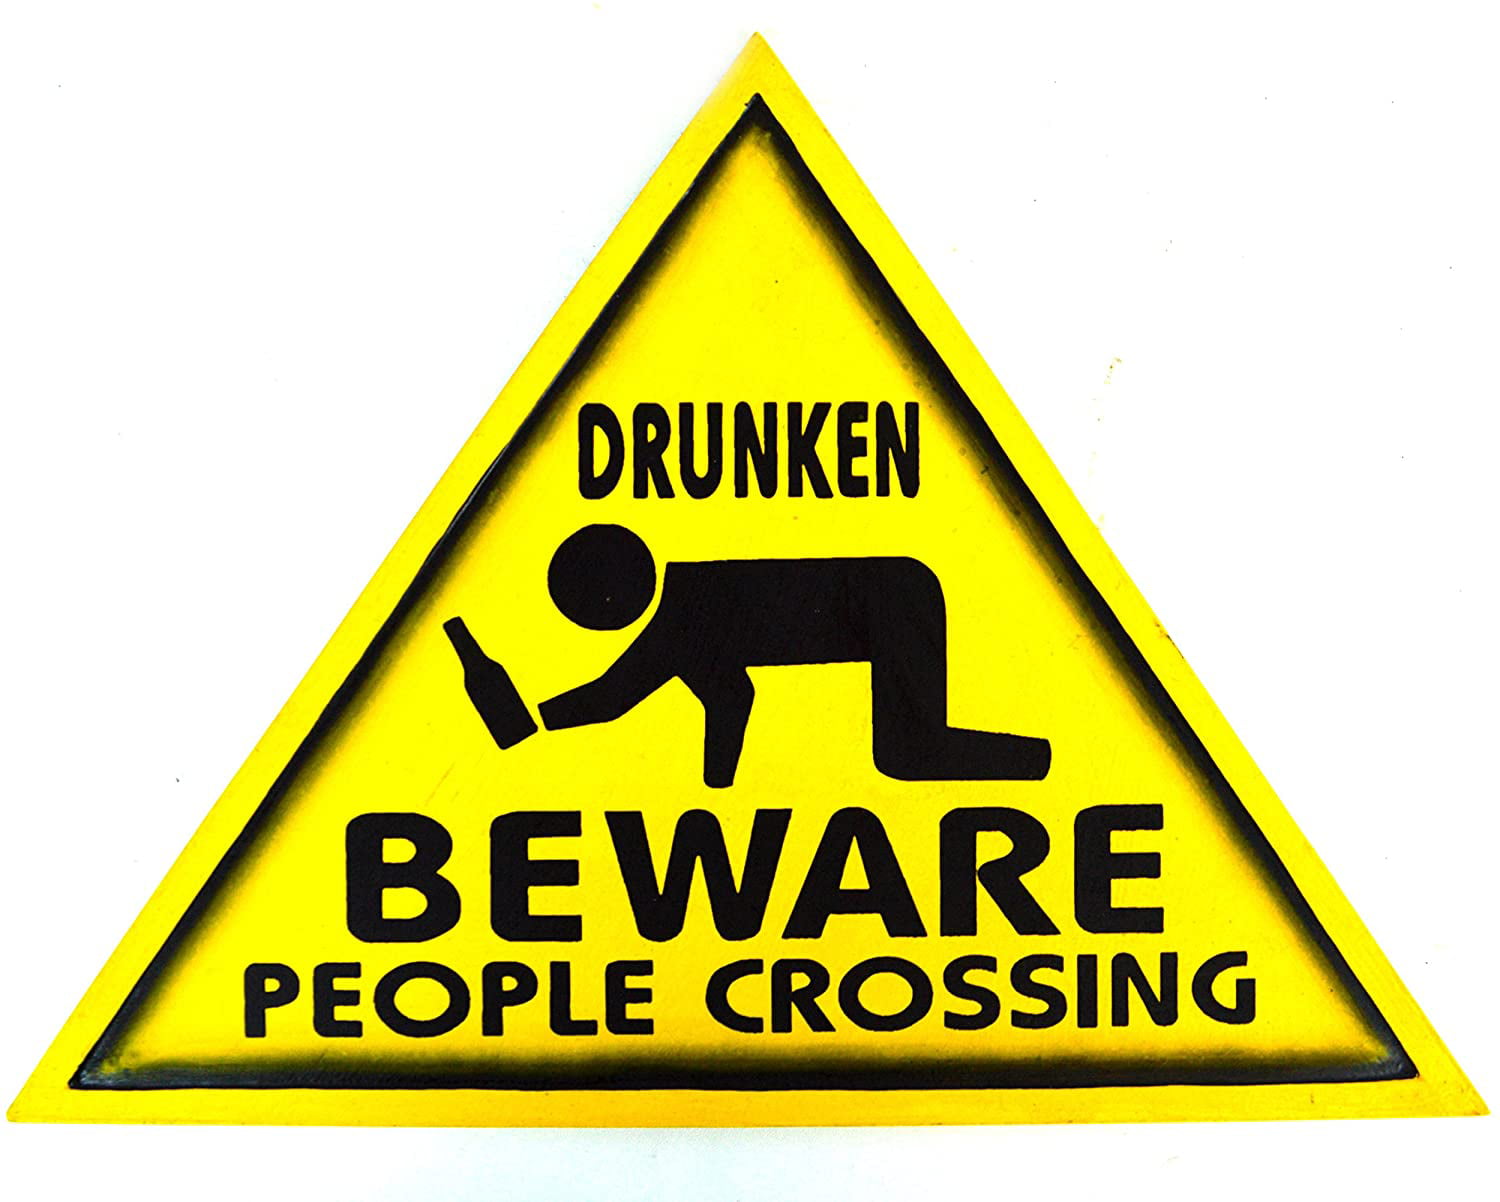 Wall Decor Metal Sign Warning Drunk People Crossing Plates 12 X 16 Inches Aluminum Metal Sign